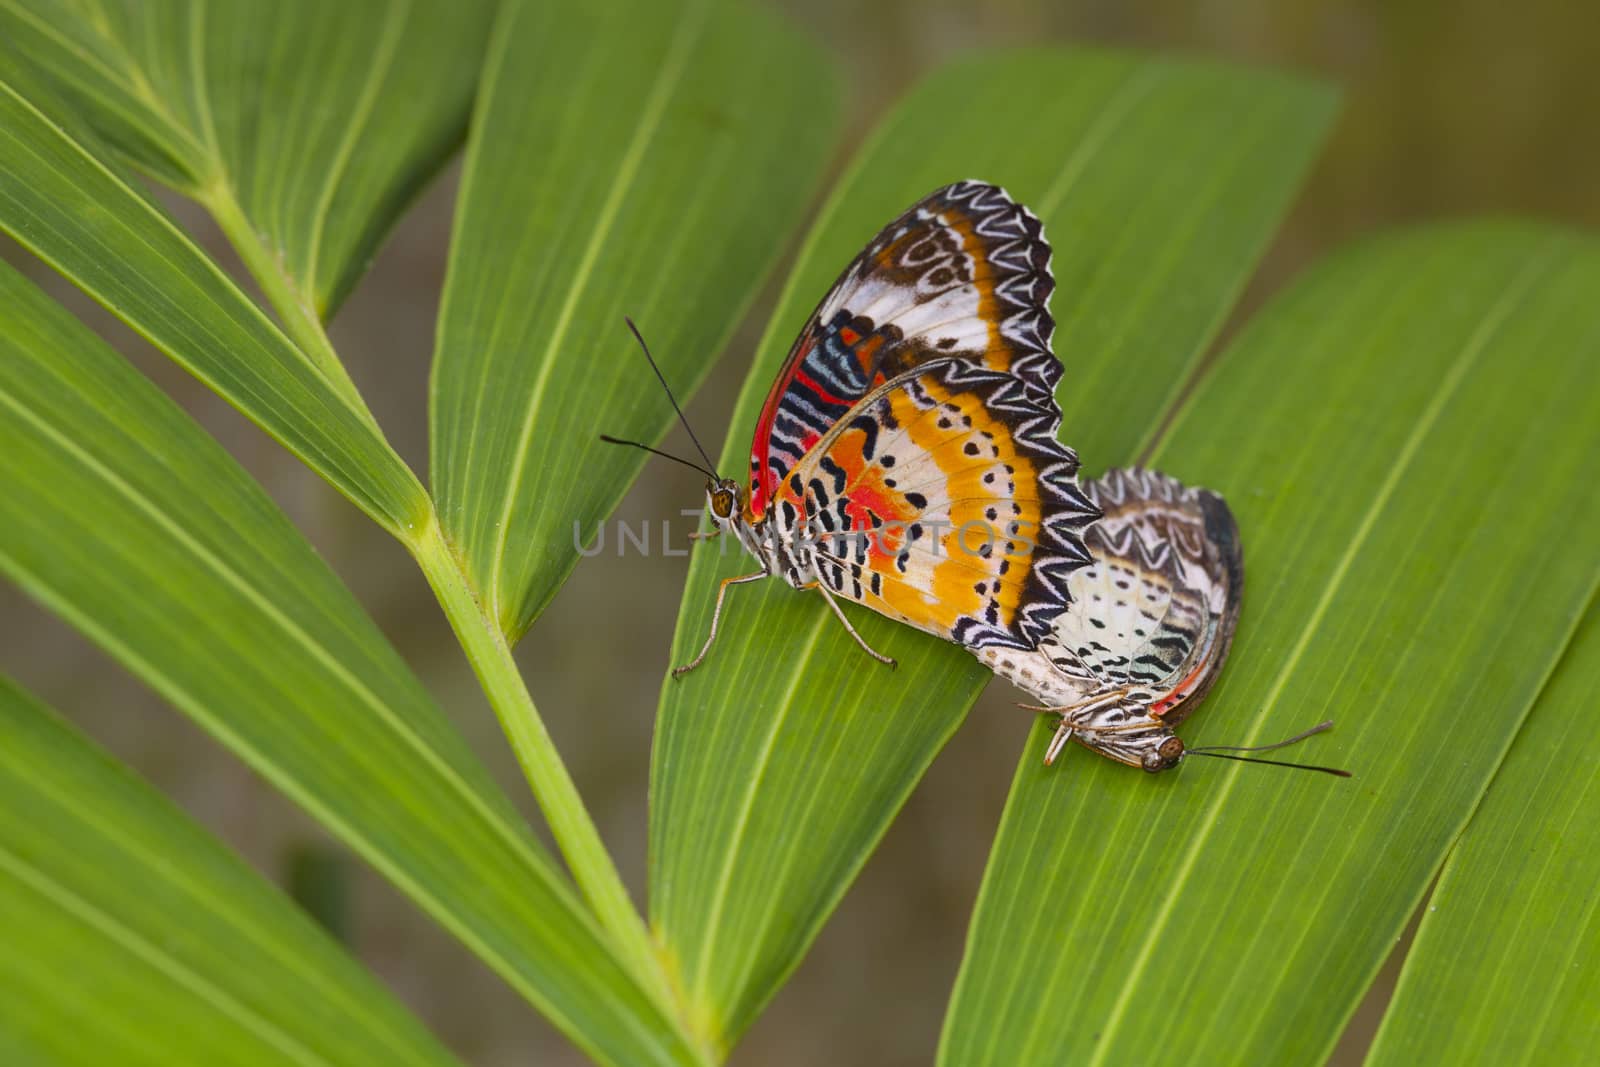 Two butterfly breeding on the leaves in nature.